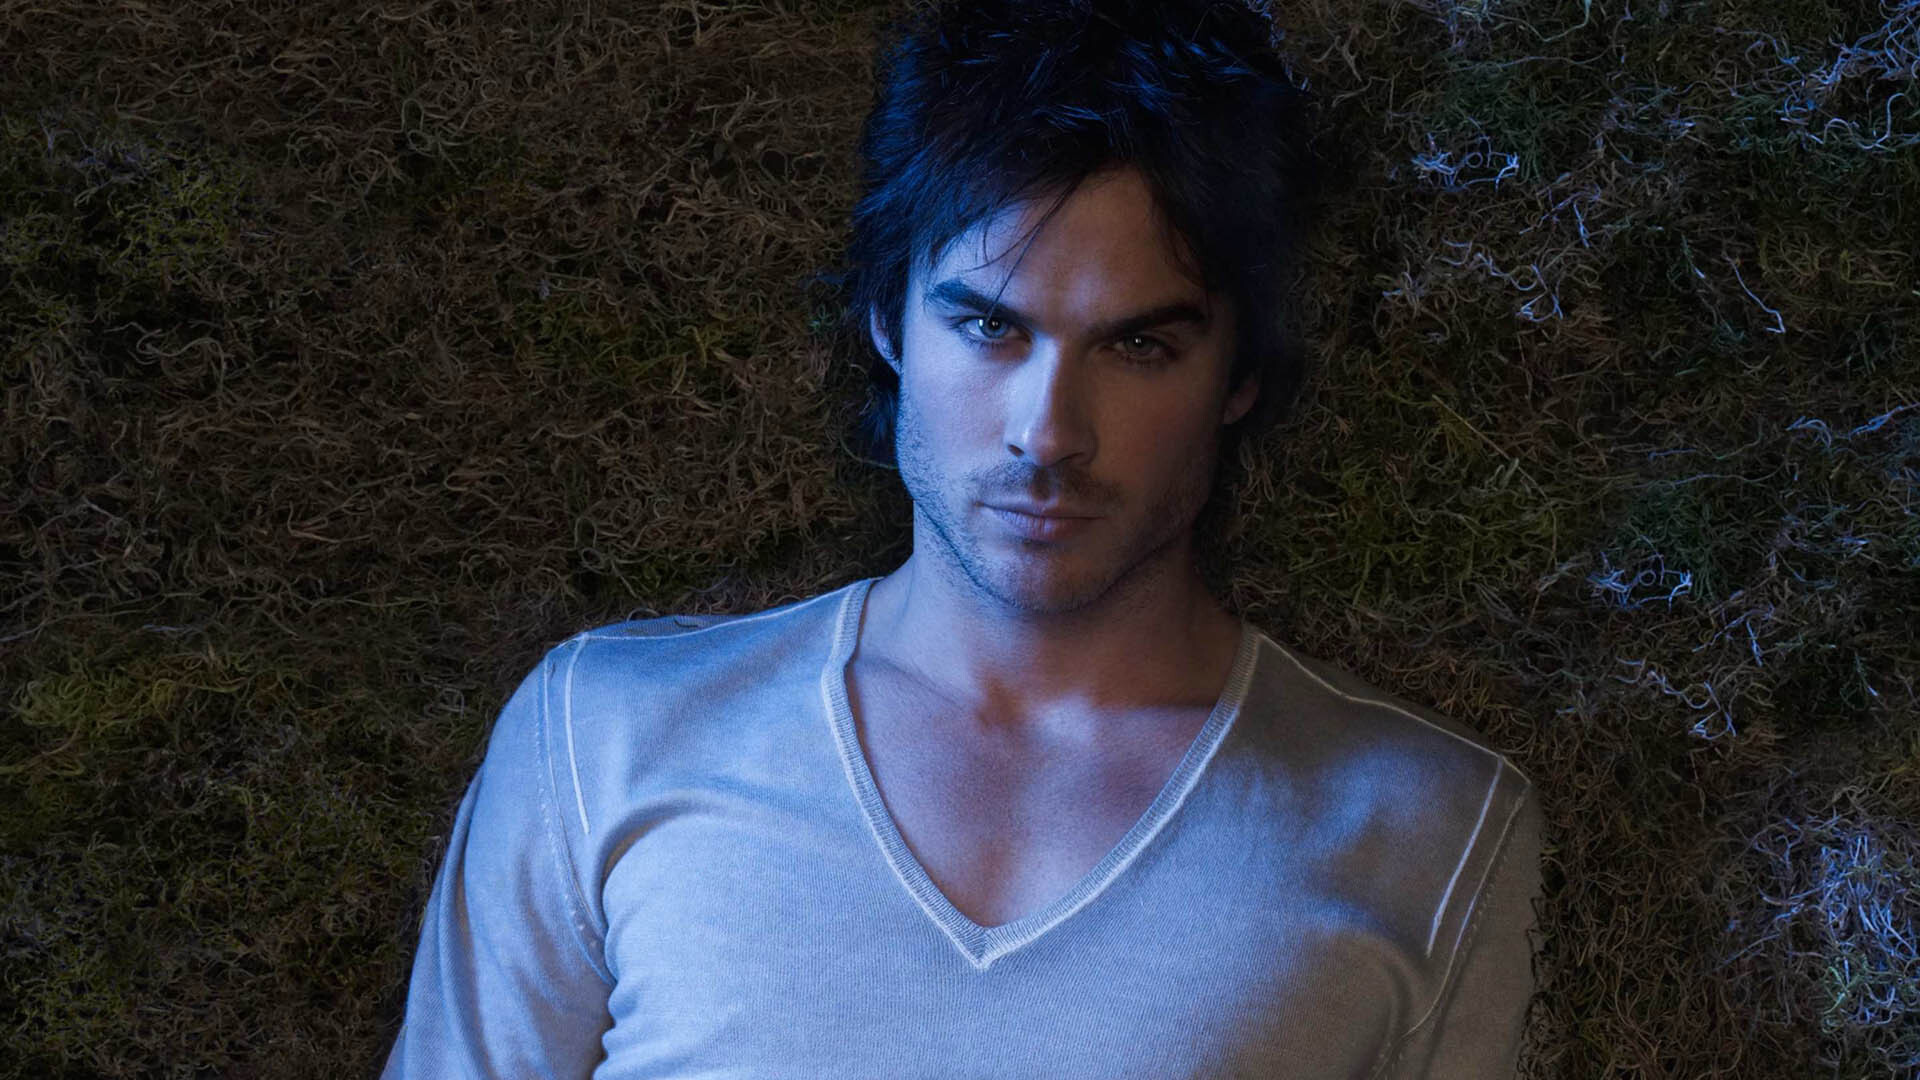 The Vampire Diaries (TV Series): Ian Joseph Somerhalder, Known For Playing Boone Carlyle In TV Mystical Drama "Lost", Dr. Luther Swann In Netflix Sci-Fi Horror Show "V Wars". 1920x1080 Full HD Background.